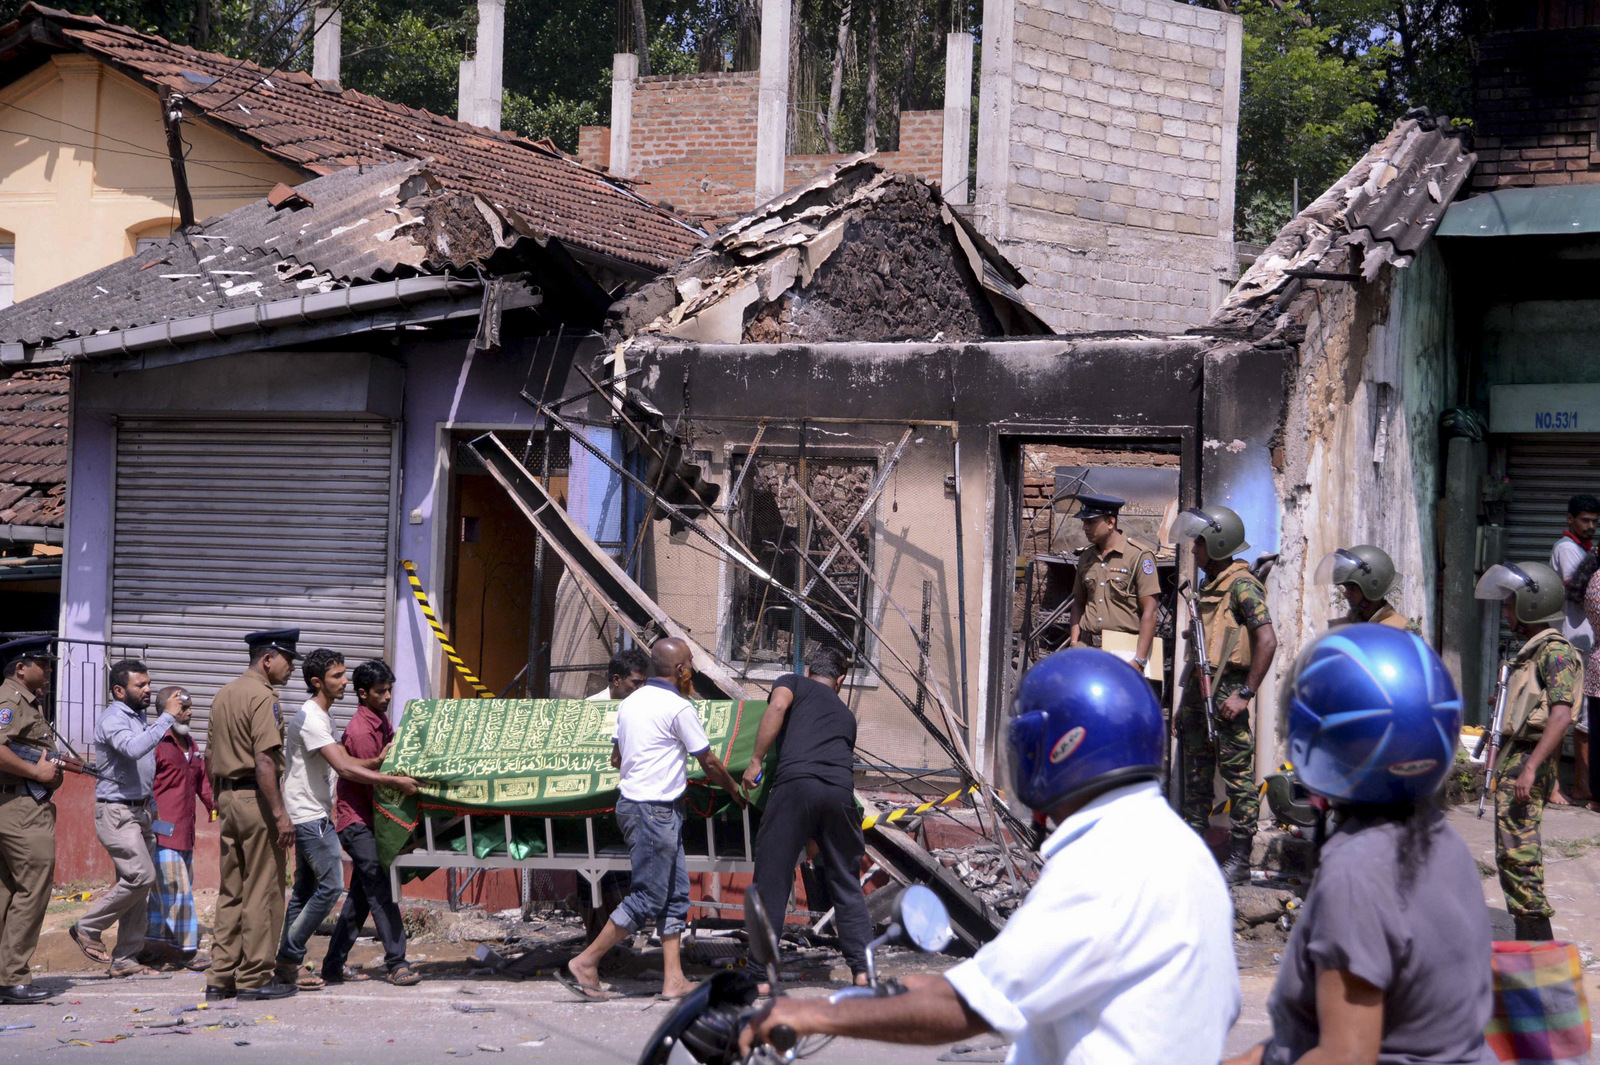 Sri Lankan police personnel stand near a vandalized building as they prepare to remove the body of a man who was killed in Digana, a suburb of Kandy, Sri Lanka, March 6, 2018. Buddhist mobs swept through the town burning at least 11 Muslim-owned shops and homes. (AP/Pradeep Pathiran)